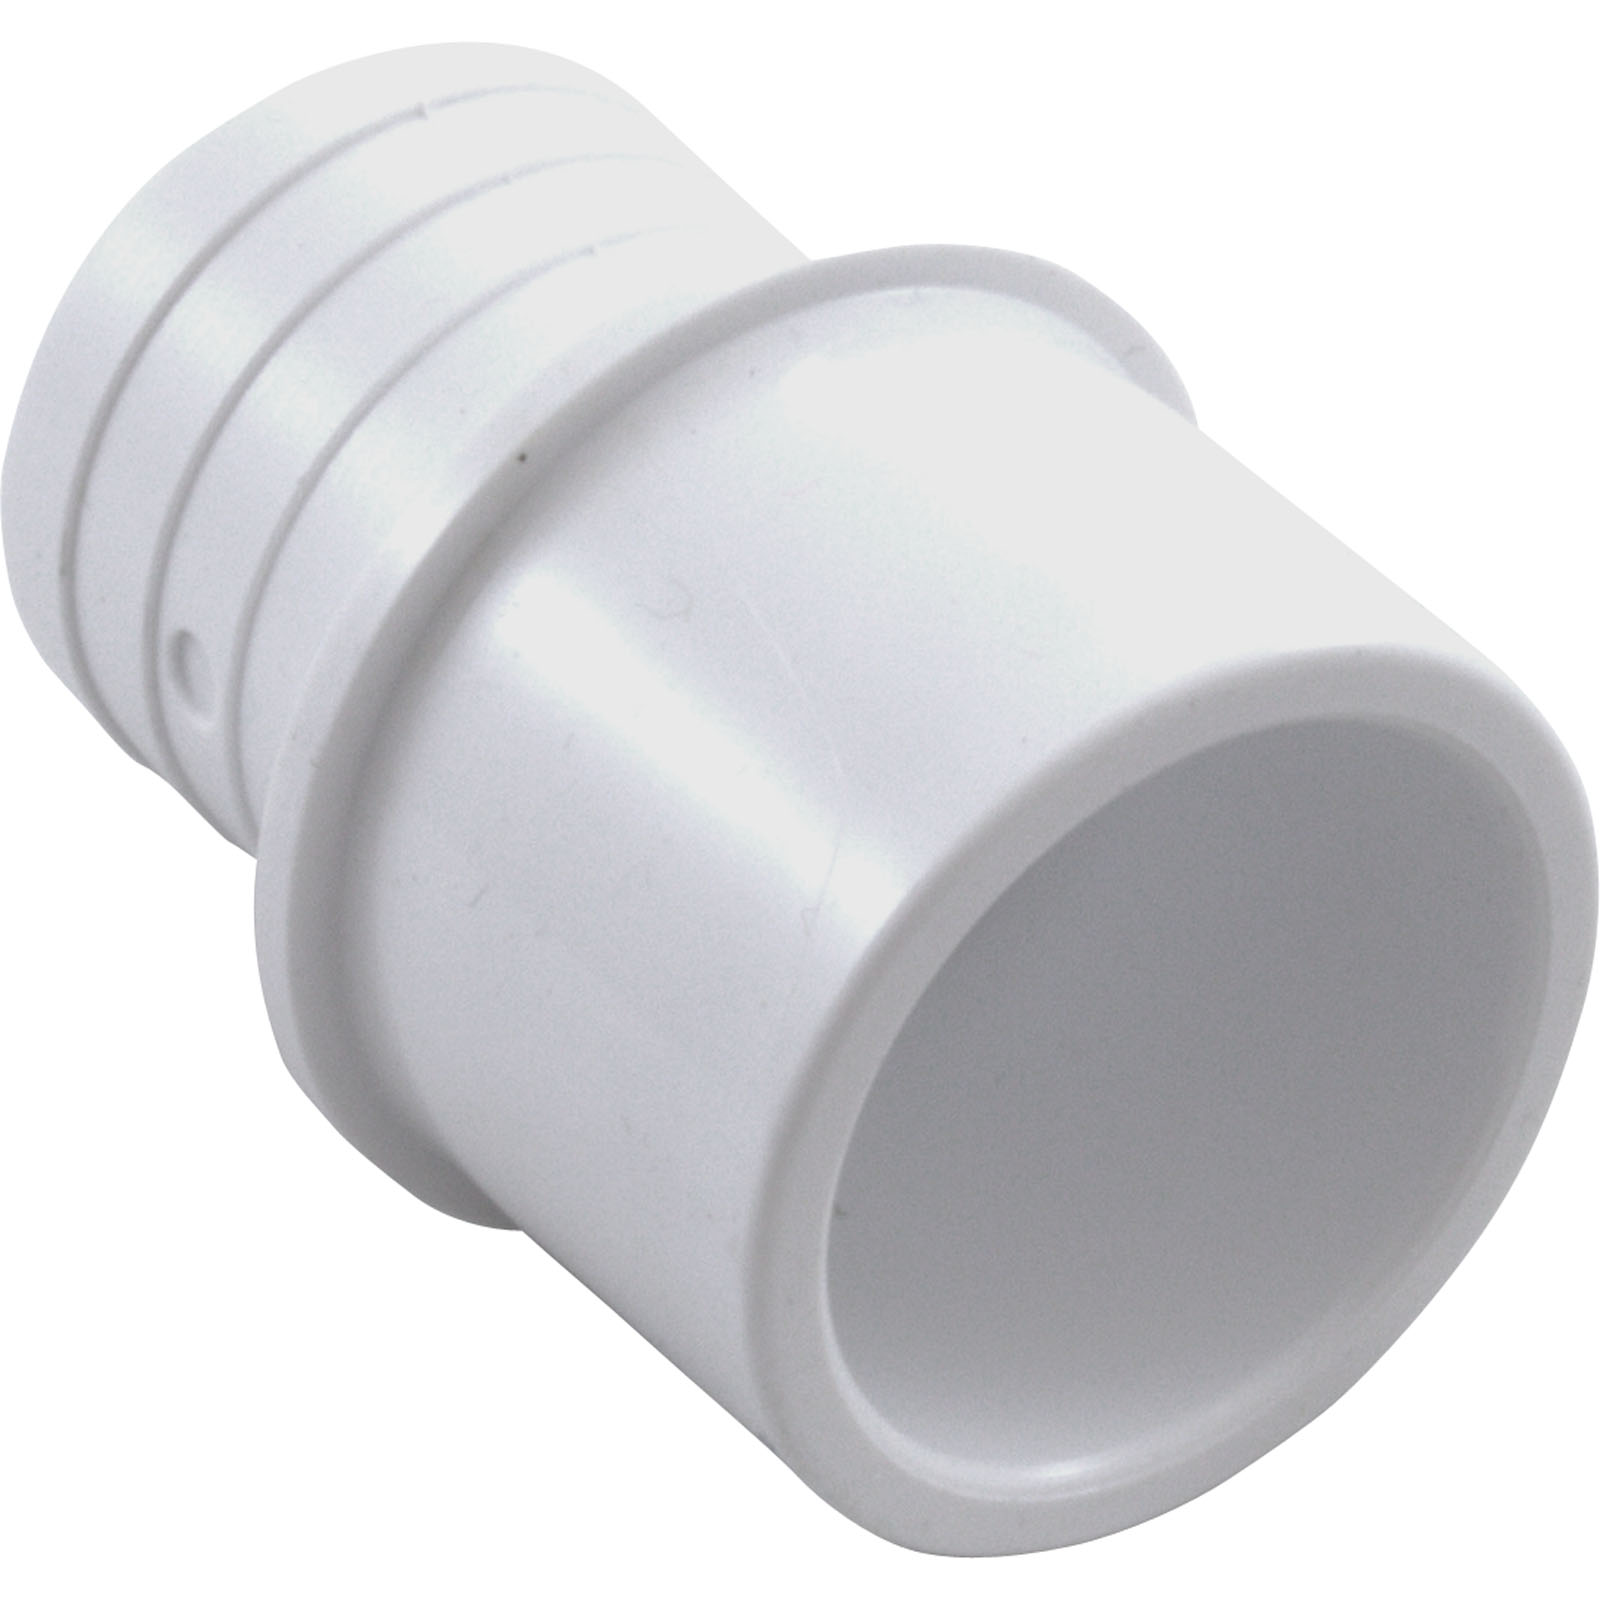 BARB ADAPTER, 3/4